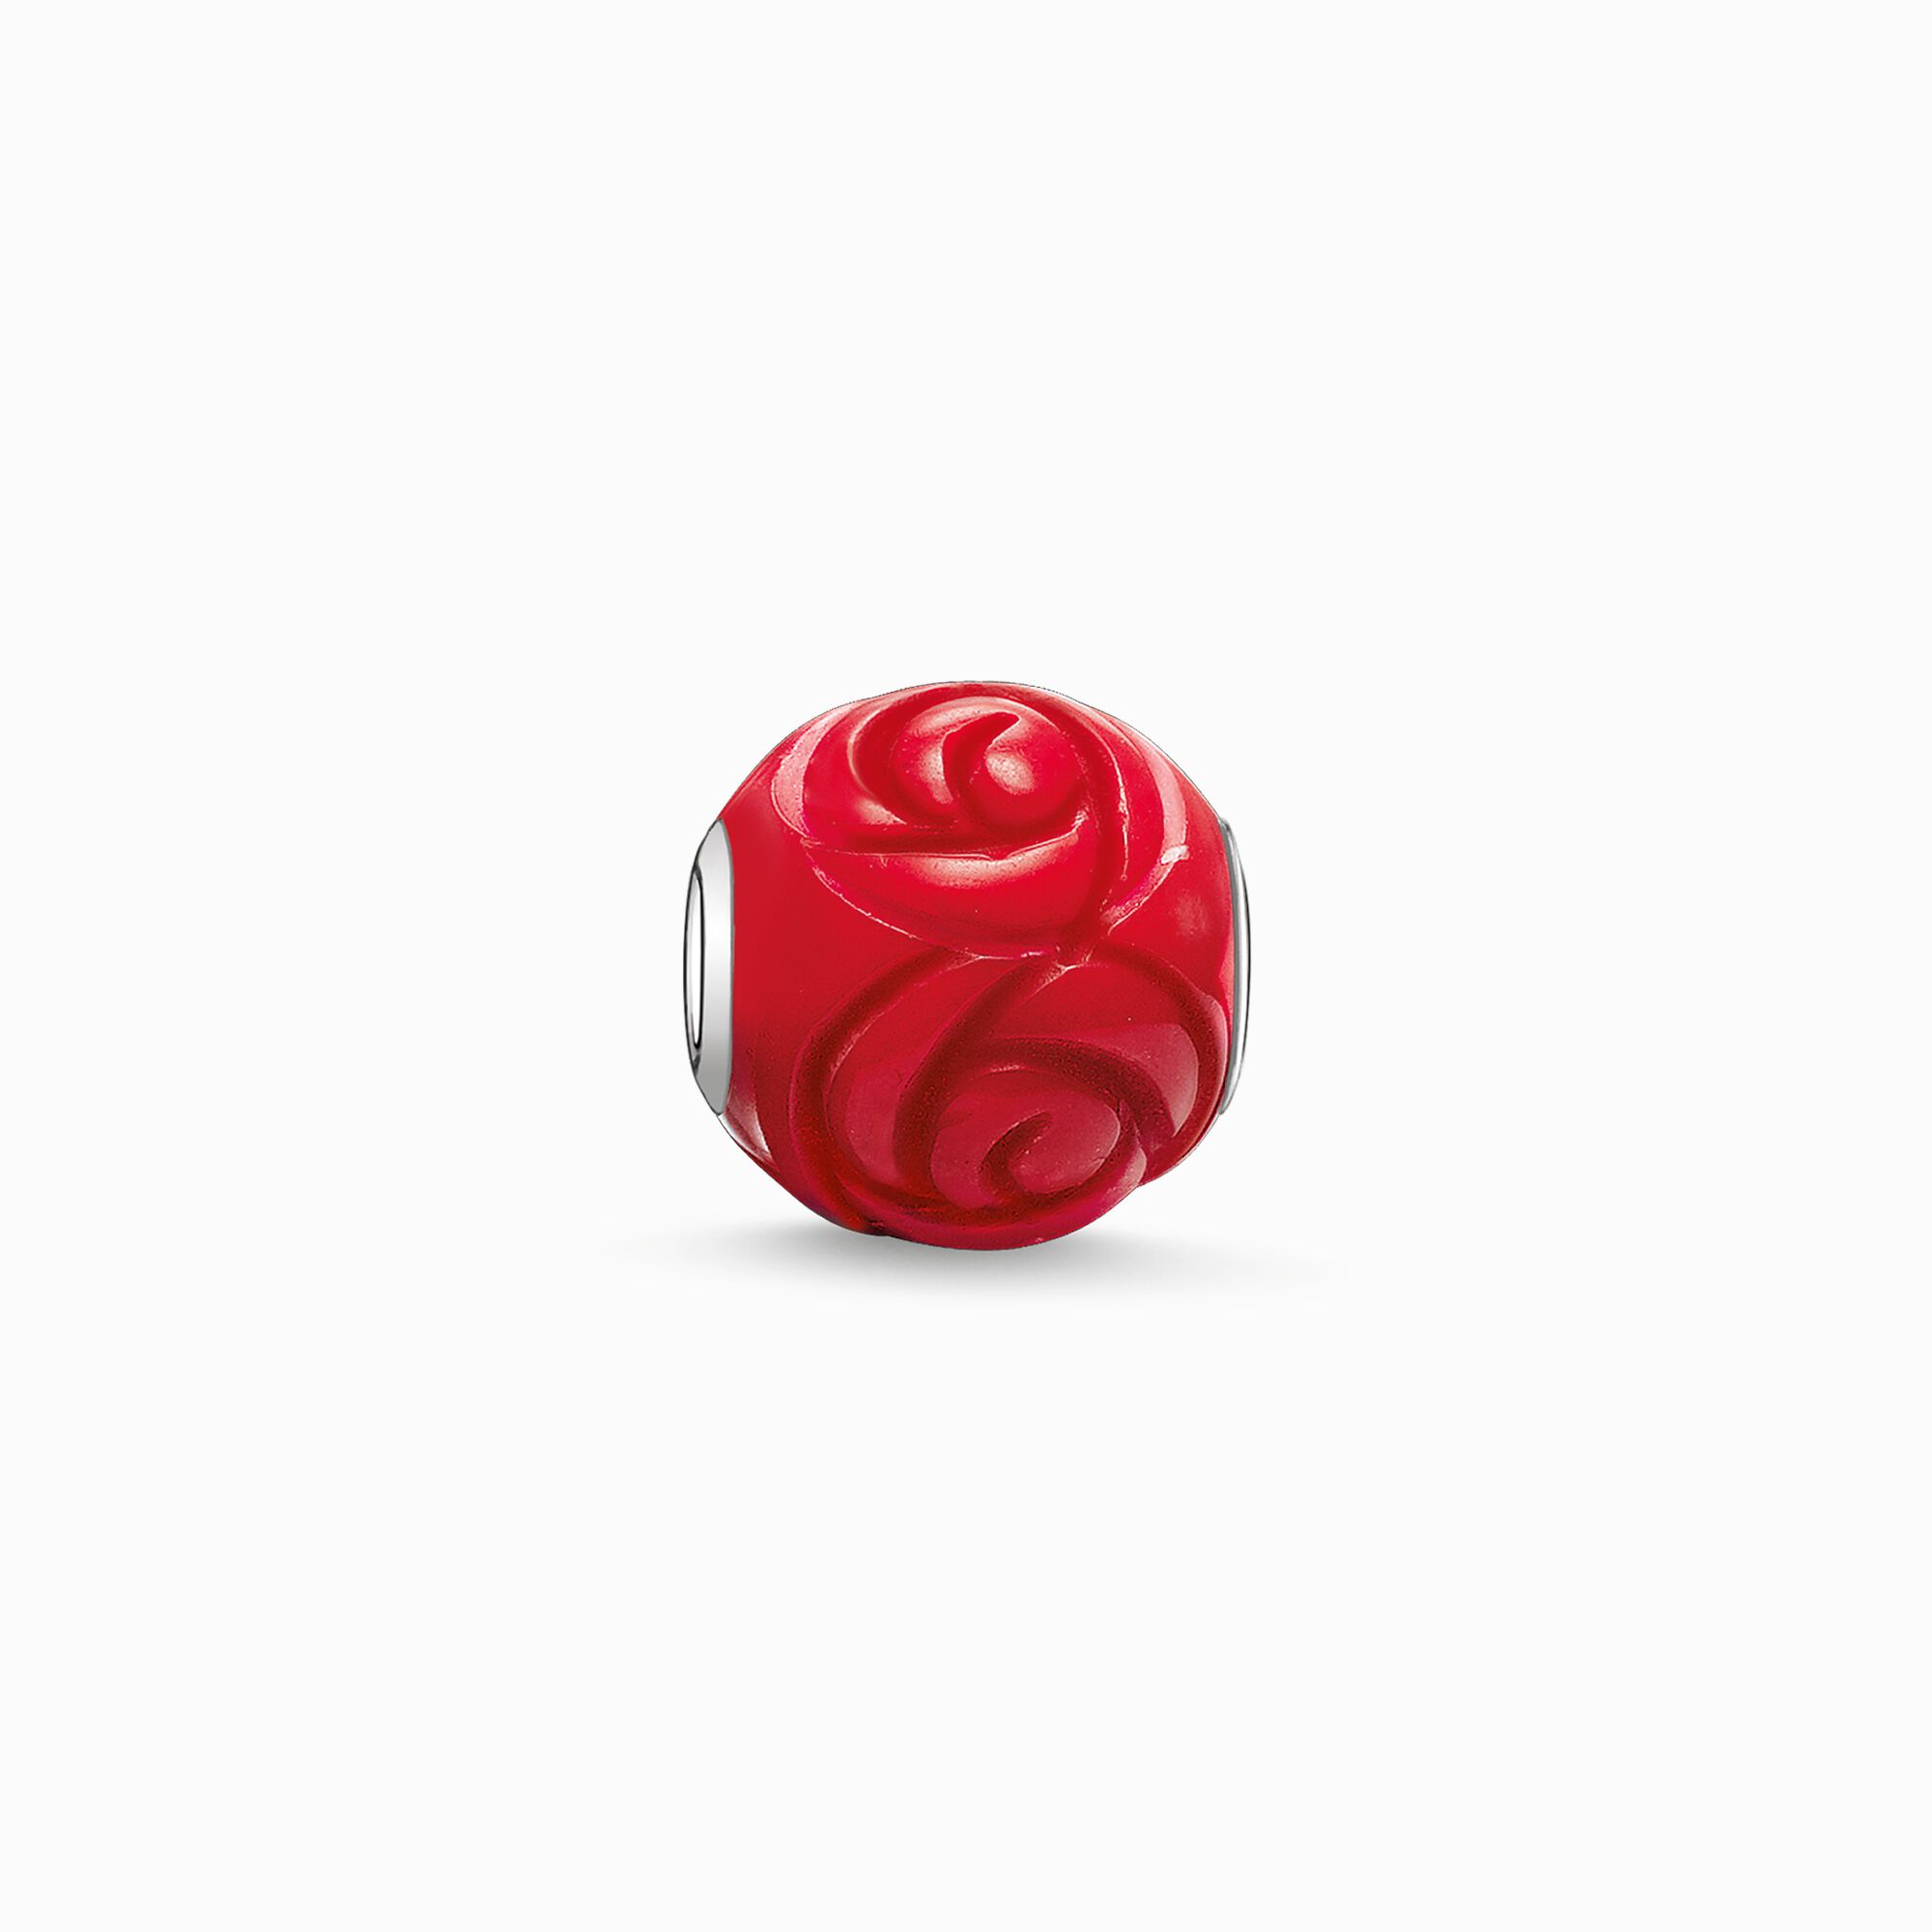 Bead red rose from the Karma Beads collection in the THOMAS SABO online store